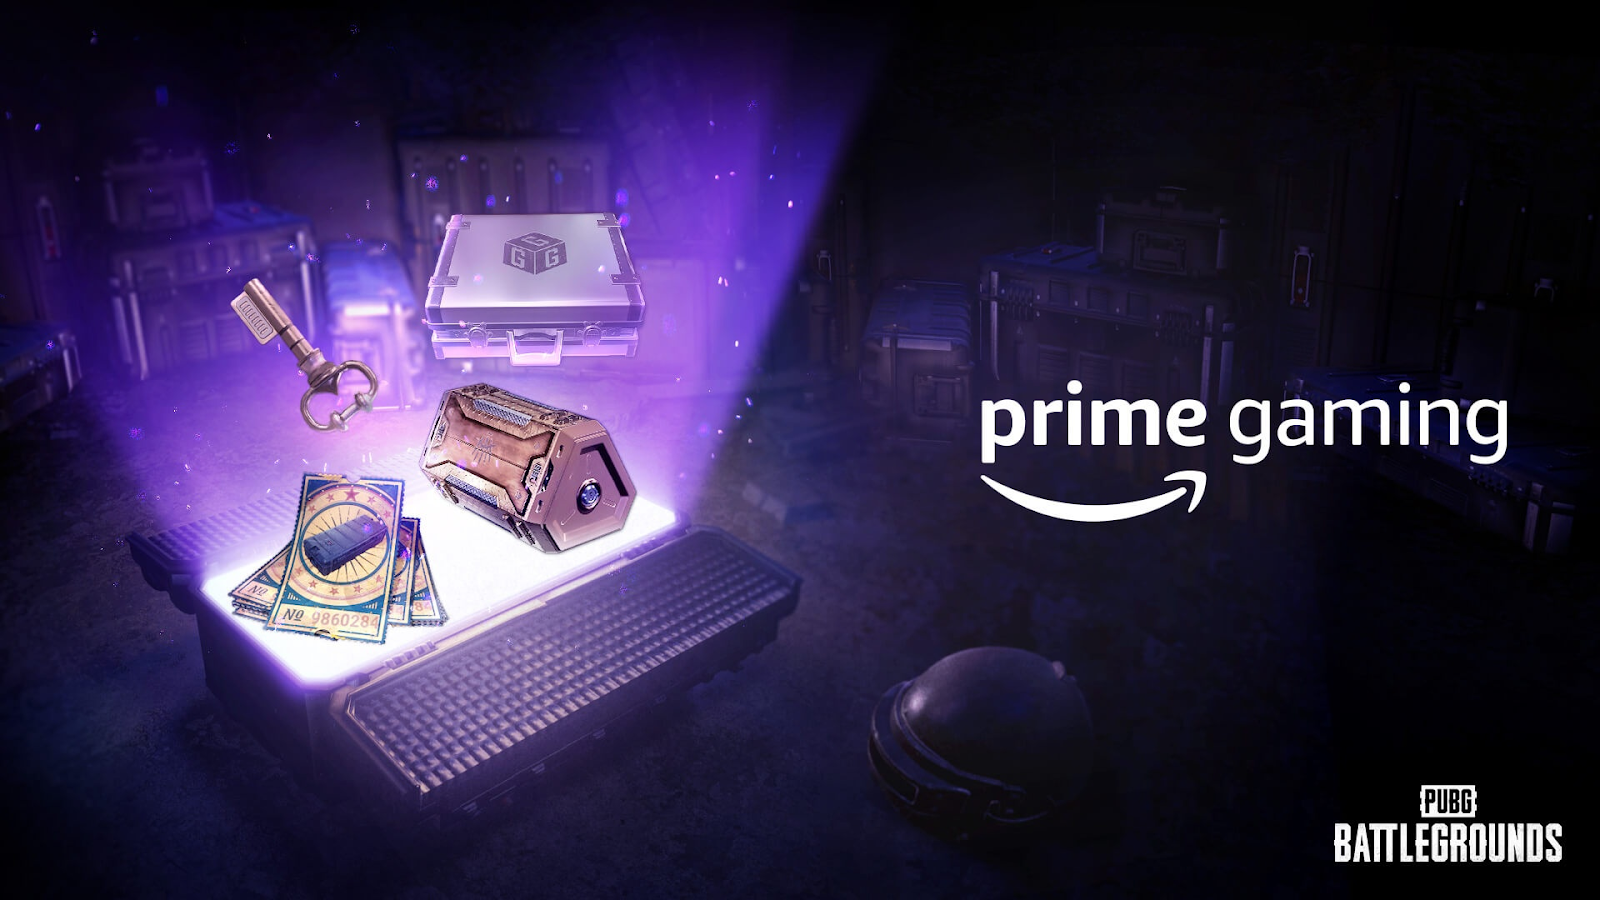 *NEW* HOW TO CLAIM FREE PRIME GAMING REWARDS!